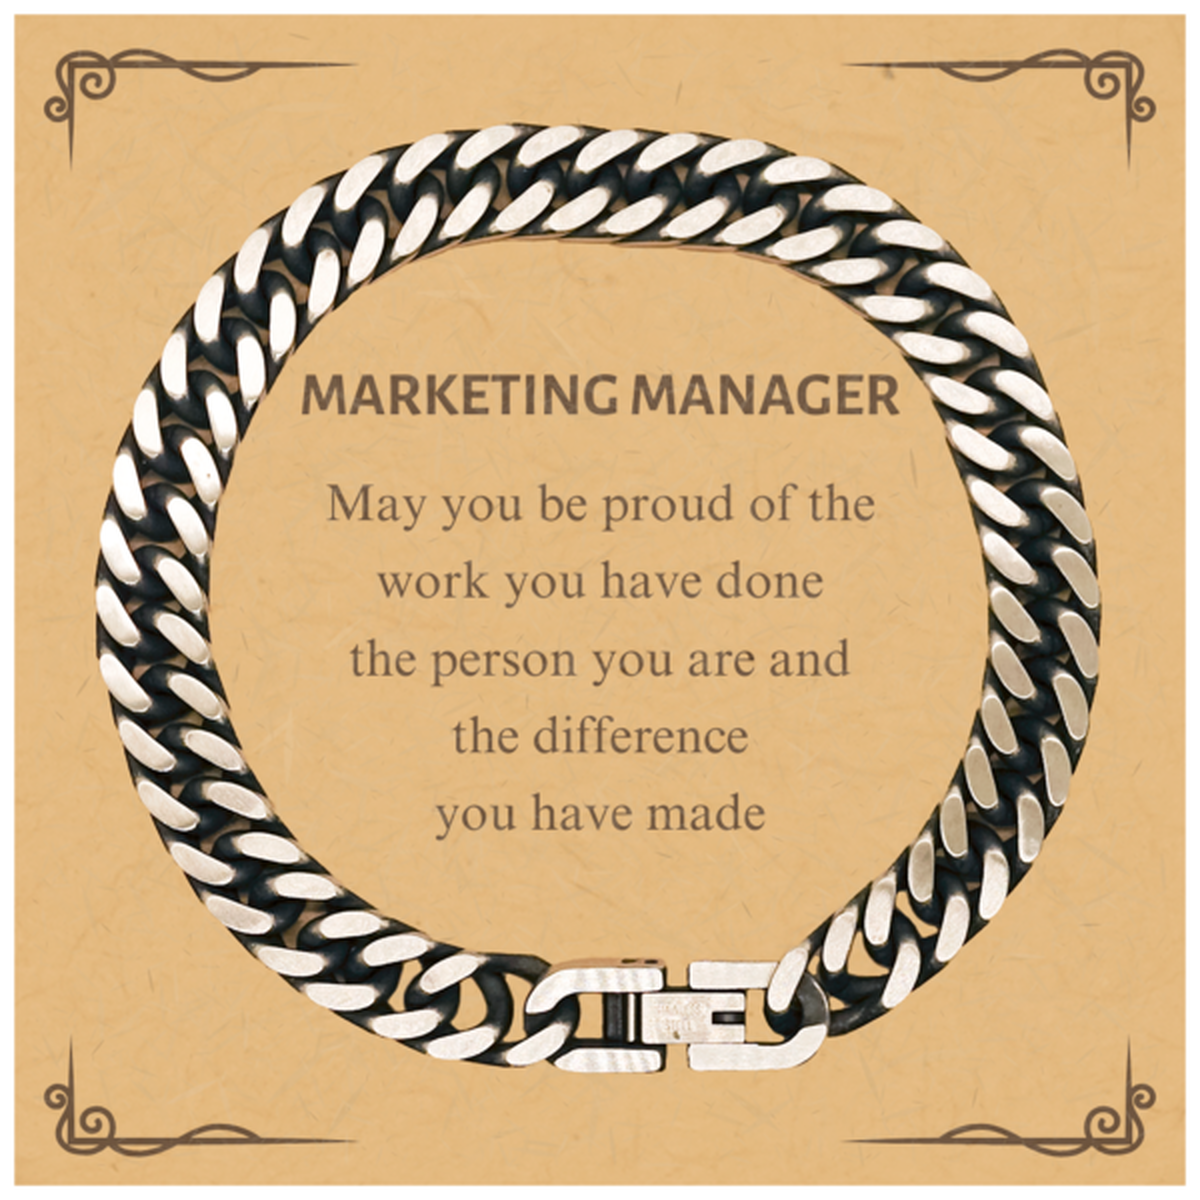 Marketing Manager May you be proud of the work you have done, Retirement Marketing Manager Cuban Link Chain Bracelet for Colleague Appreciation Gifts Amazing for Marketing Manager